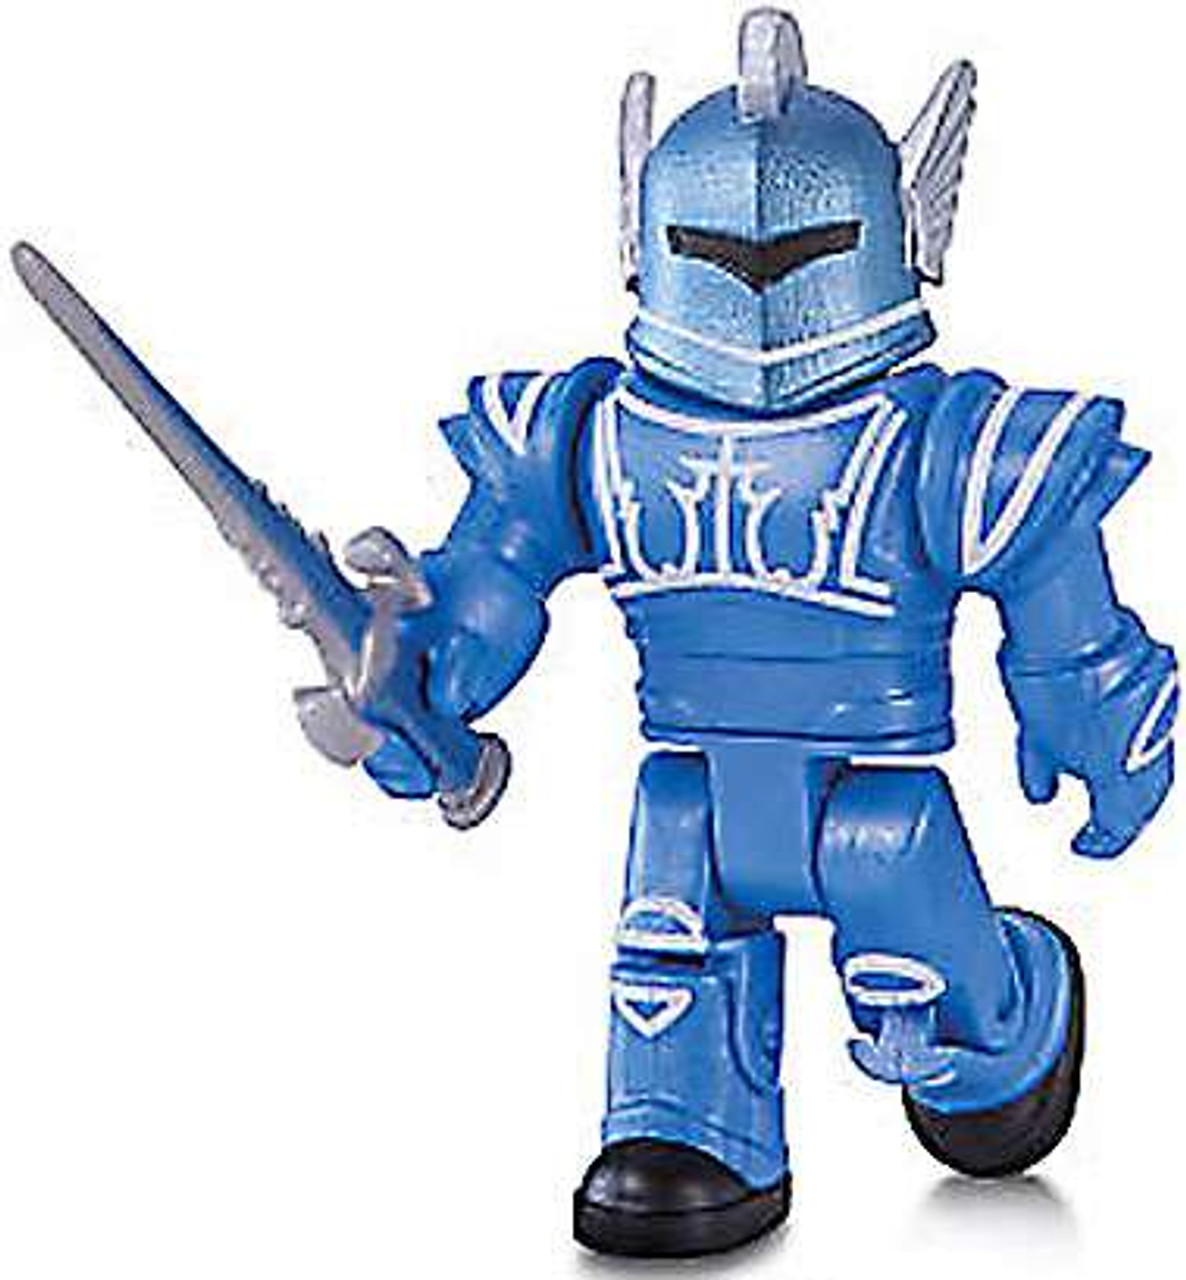 Roblox Series 1 Alar Knight Of Splintered Skies 3 Mini Figure No - redcliff knight armor redcliff collection roblox